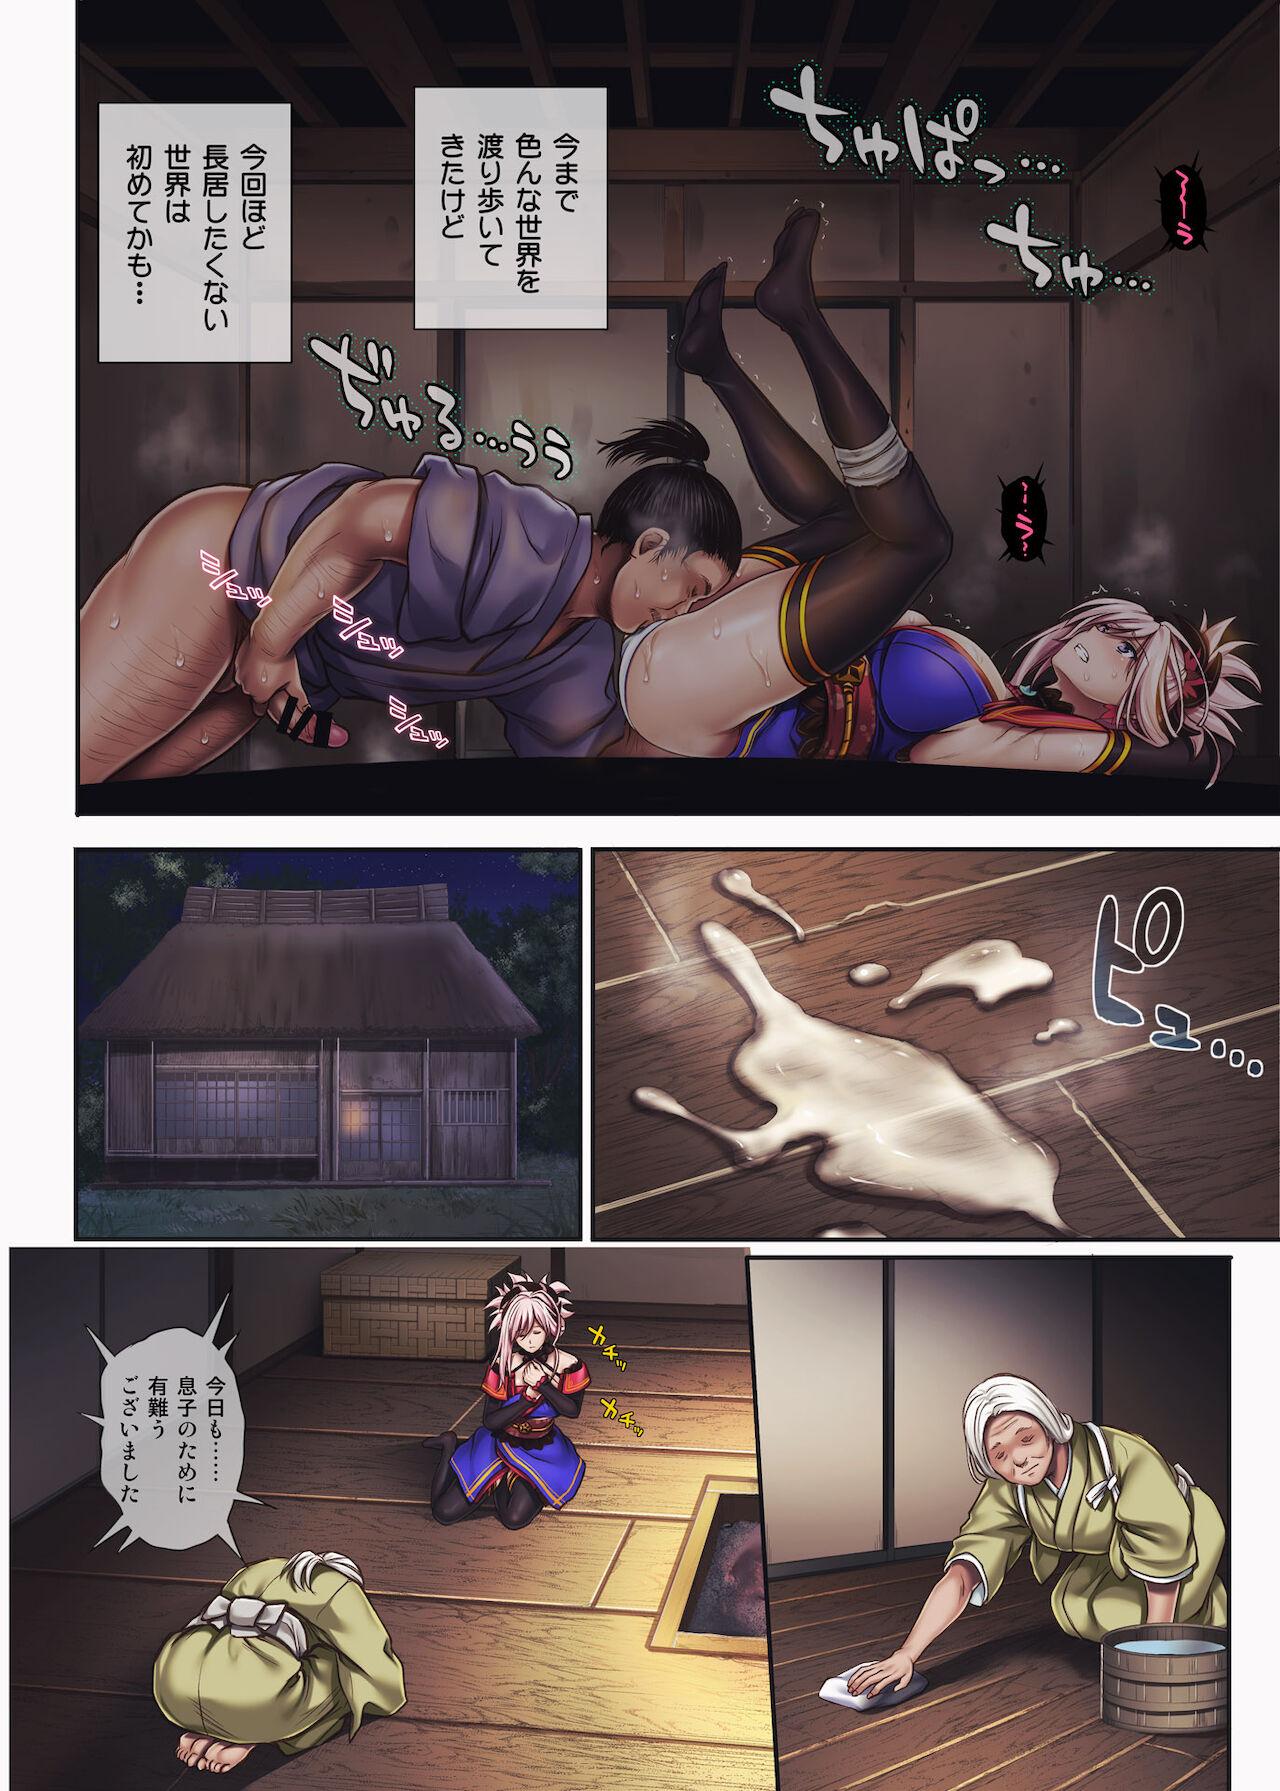 Atm Cyclone no Doujinshi Full Color Pack 4 - Fate grand order Bhabhi - Page 5